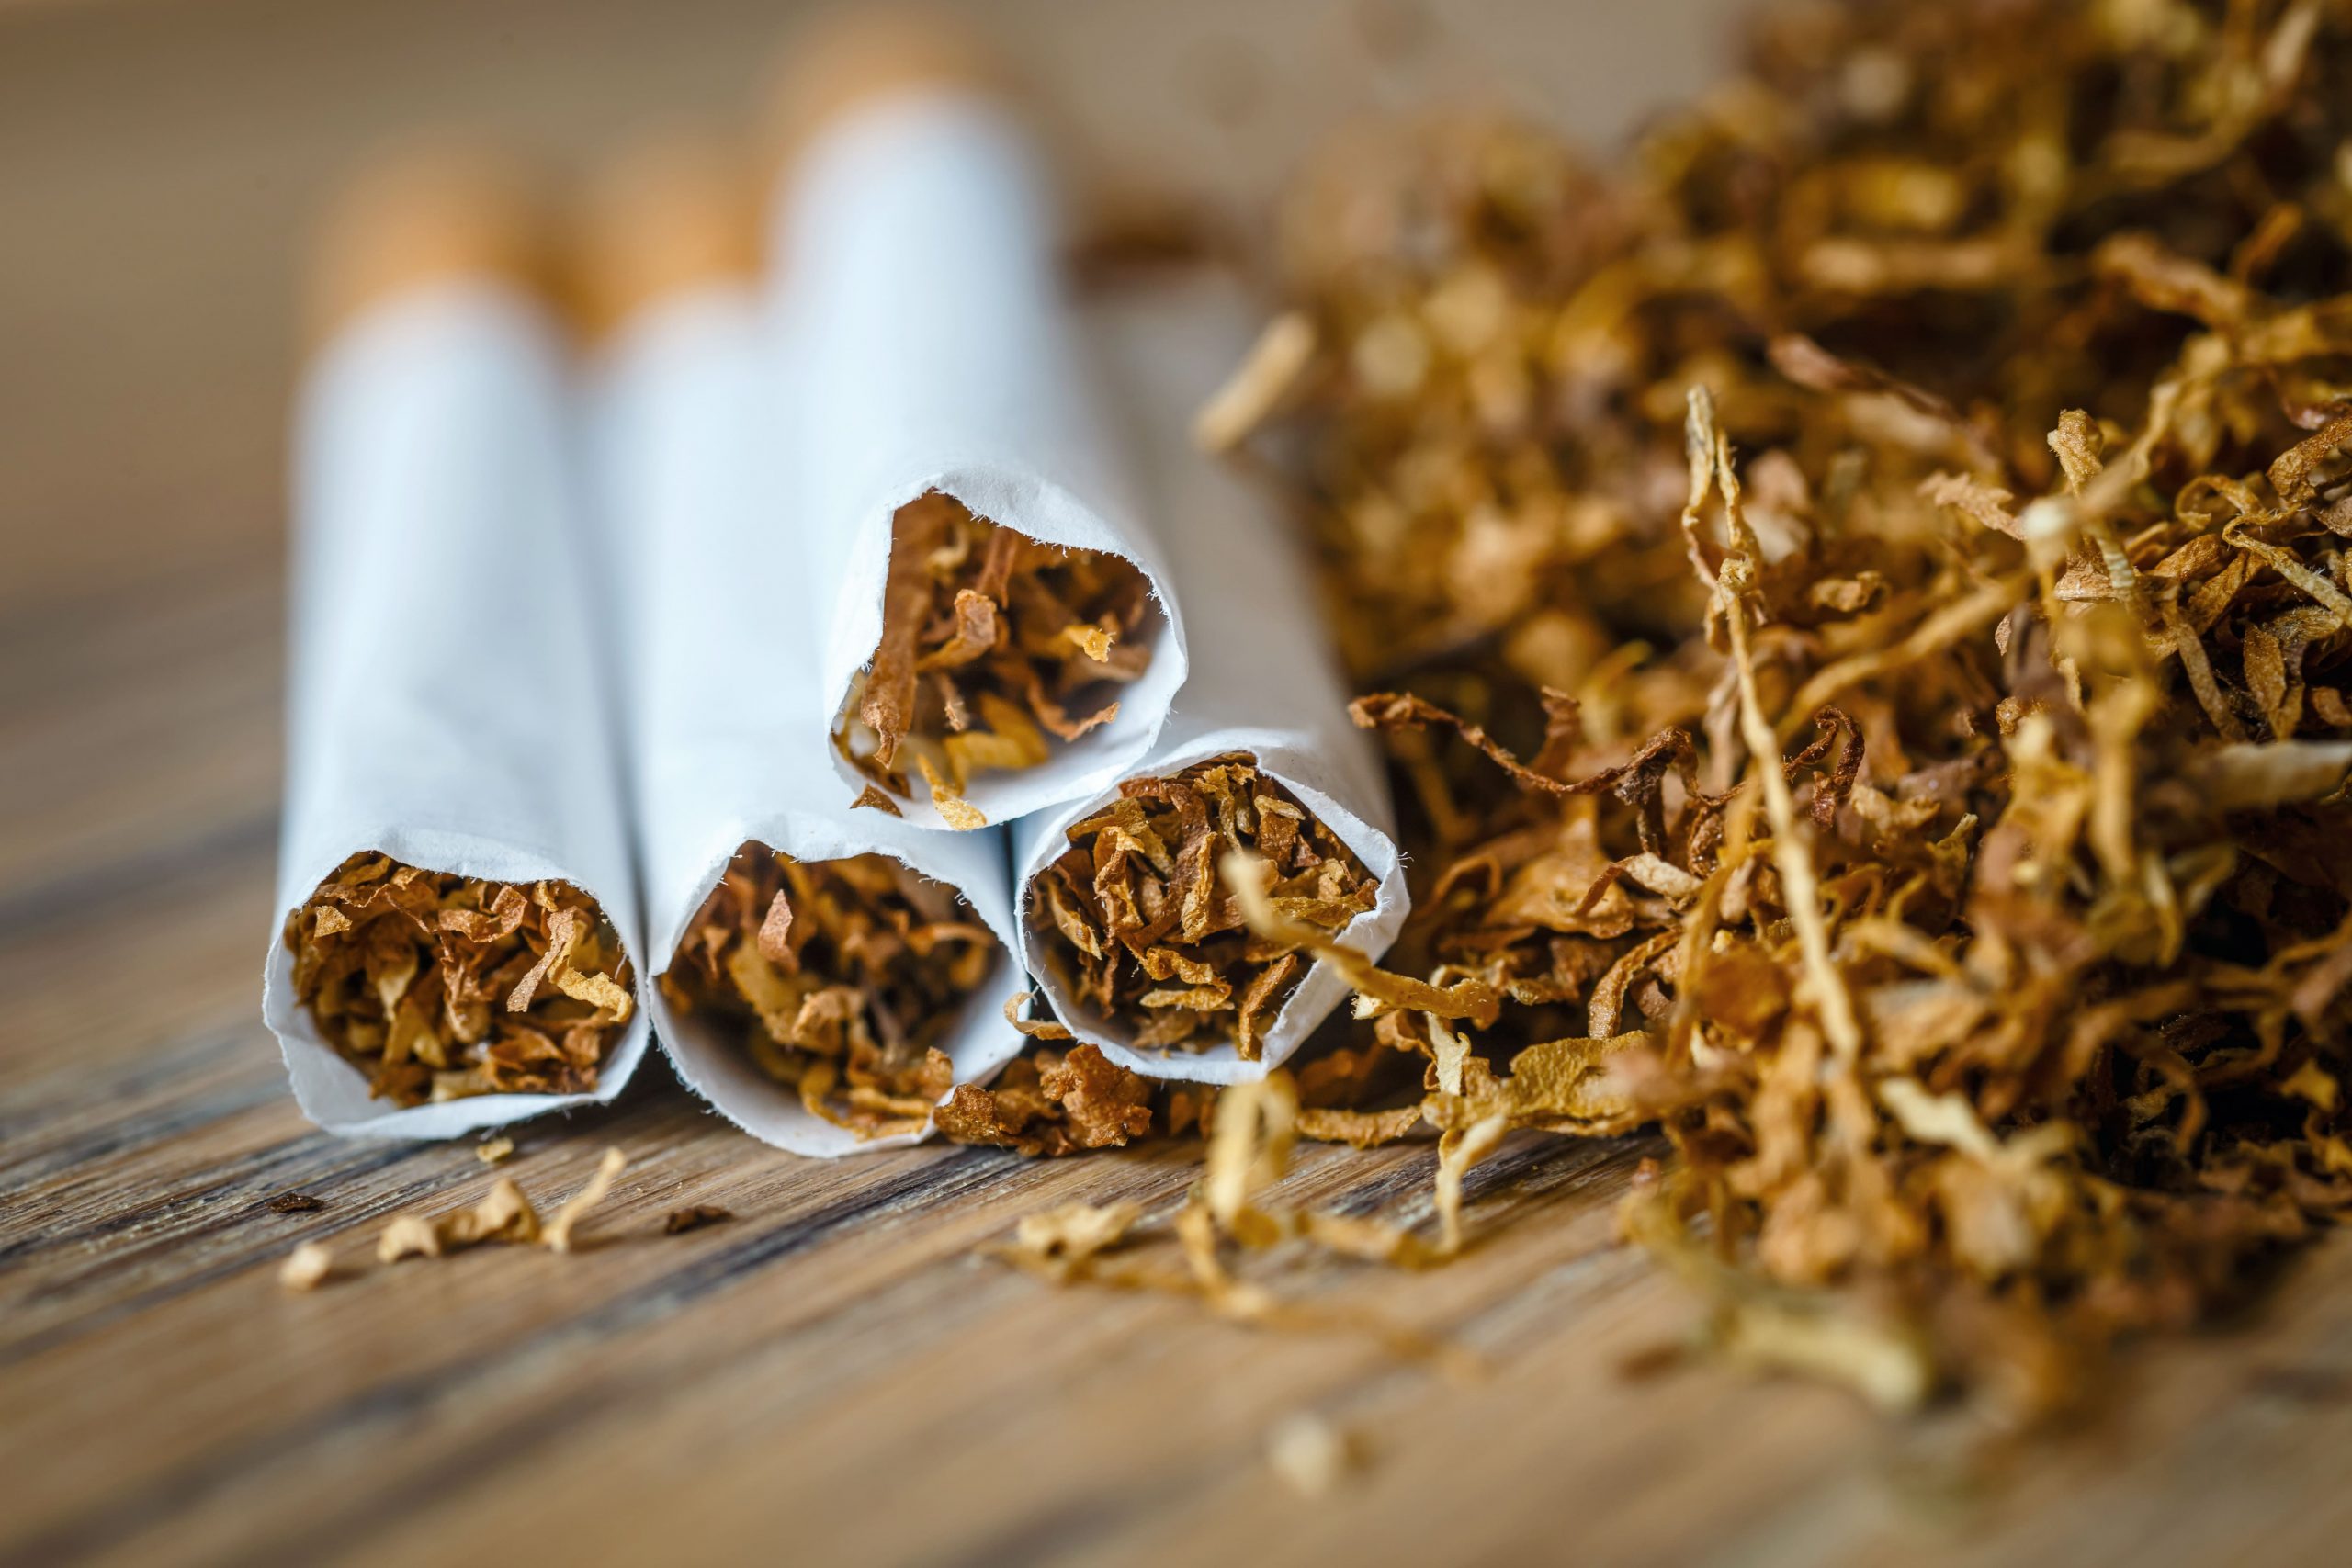 is it illegal to grow tobacco?